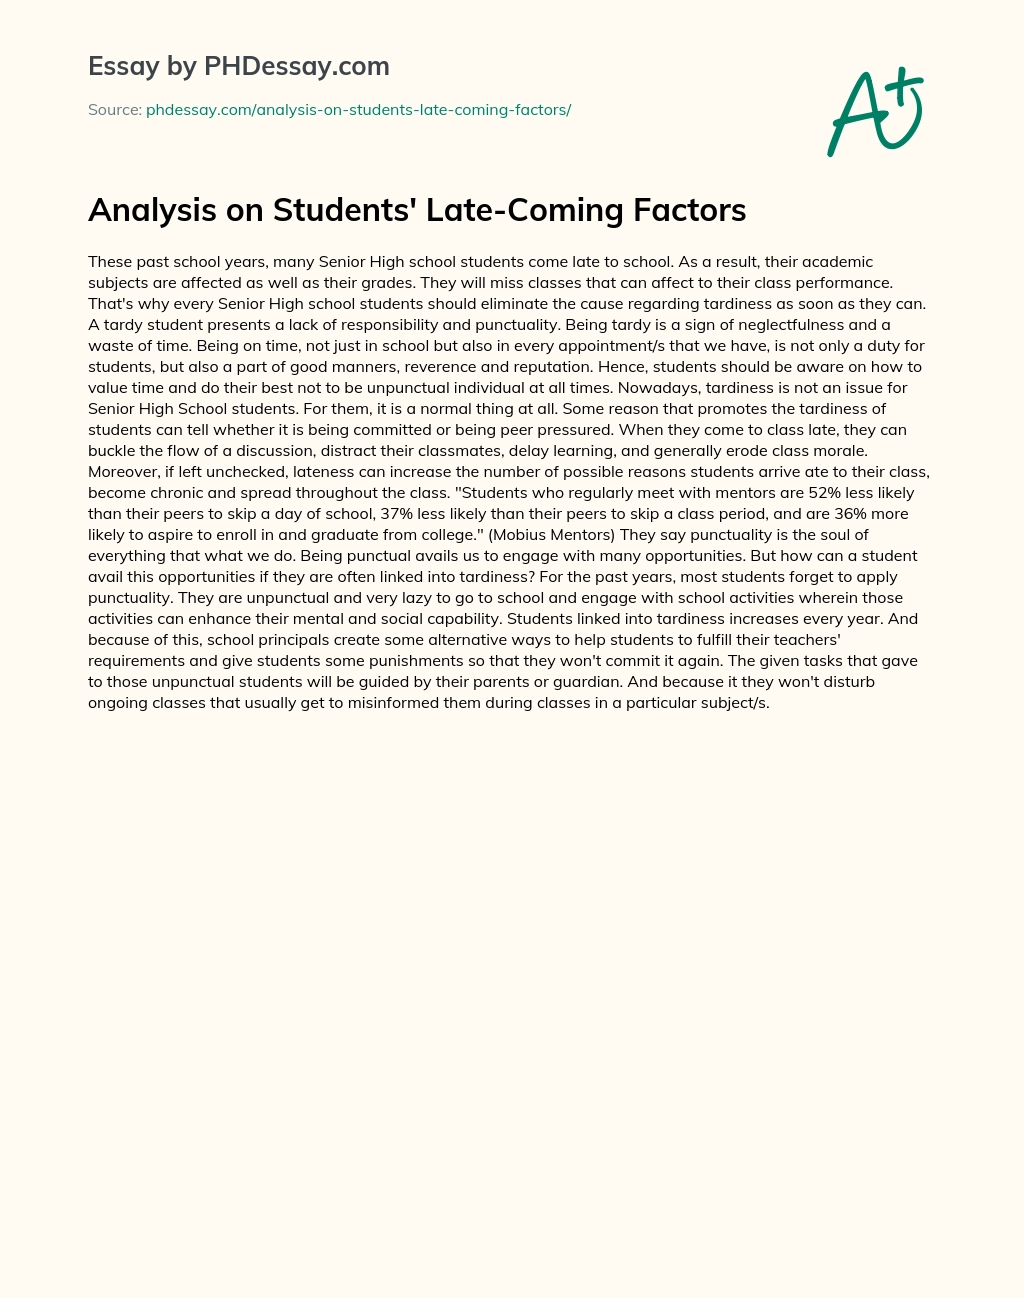 Analysis on Students’ Late-Coming Factors essay